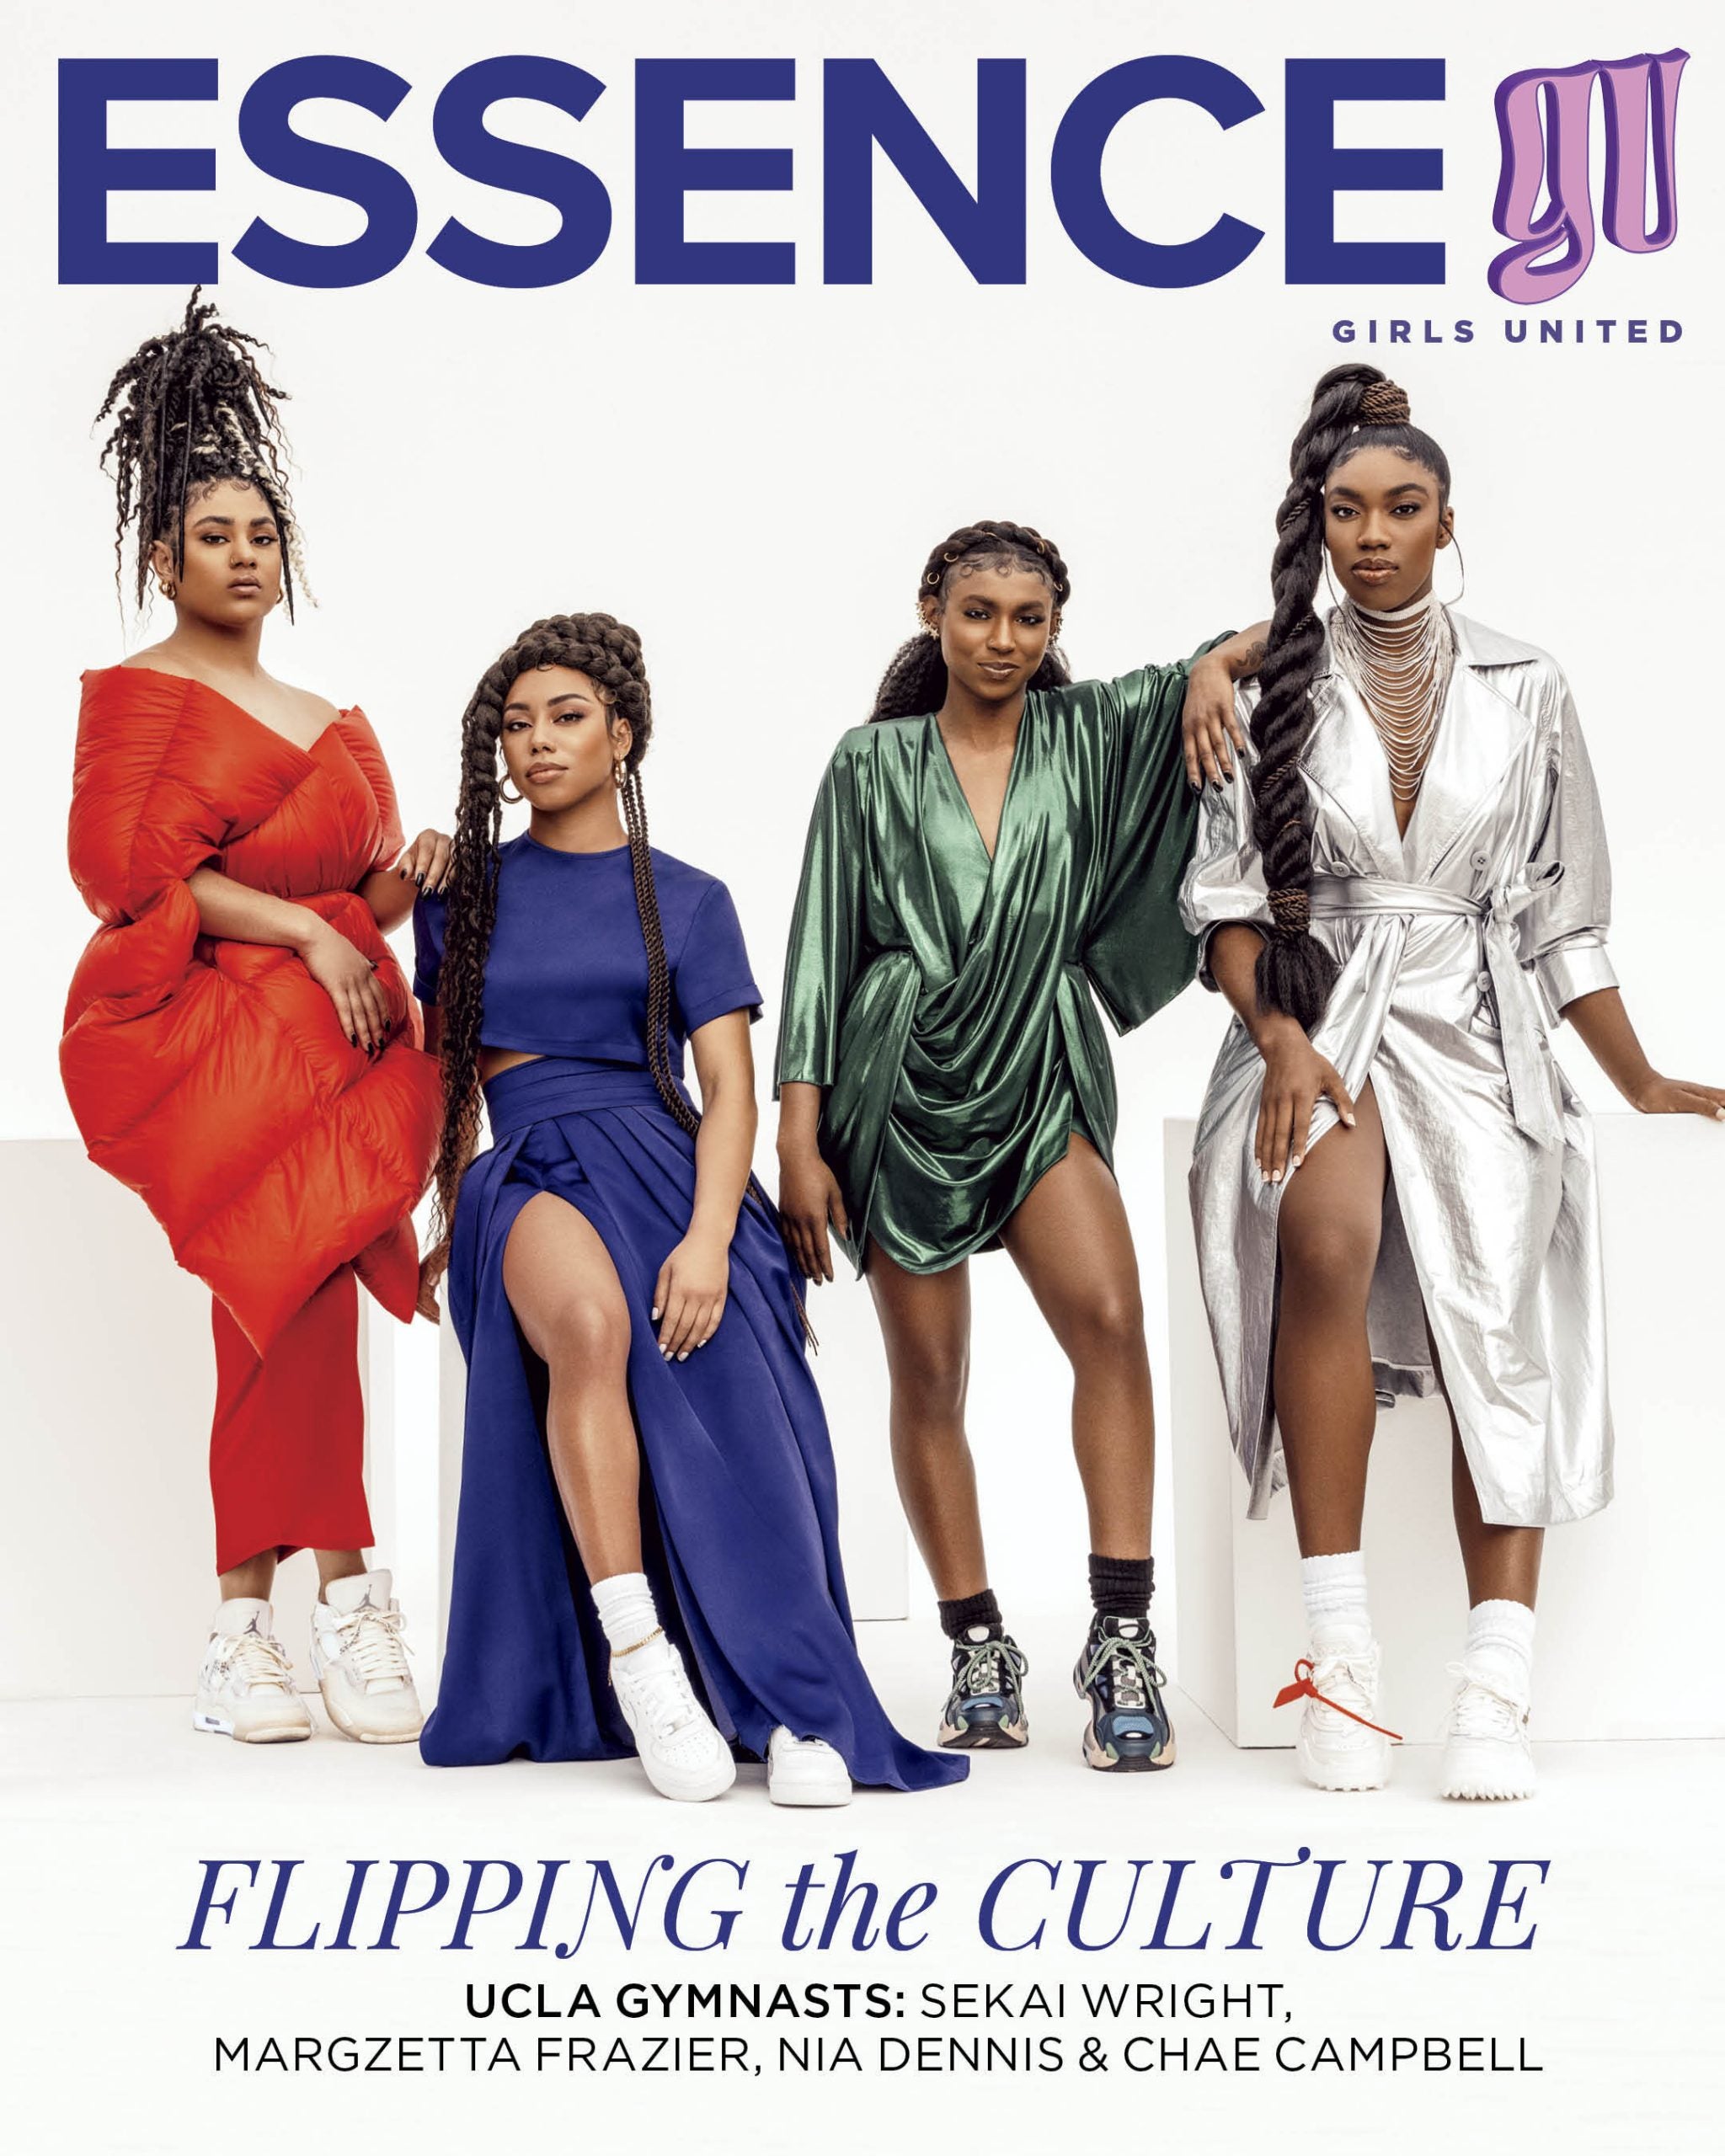 UCLA Gymnasts Celebrate Black Excellence On New Girl United's Digital Cover